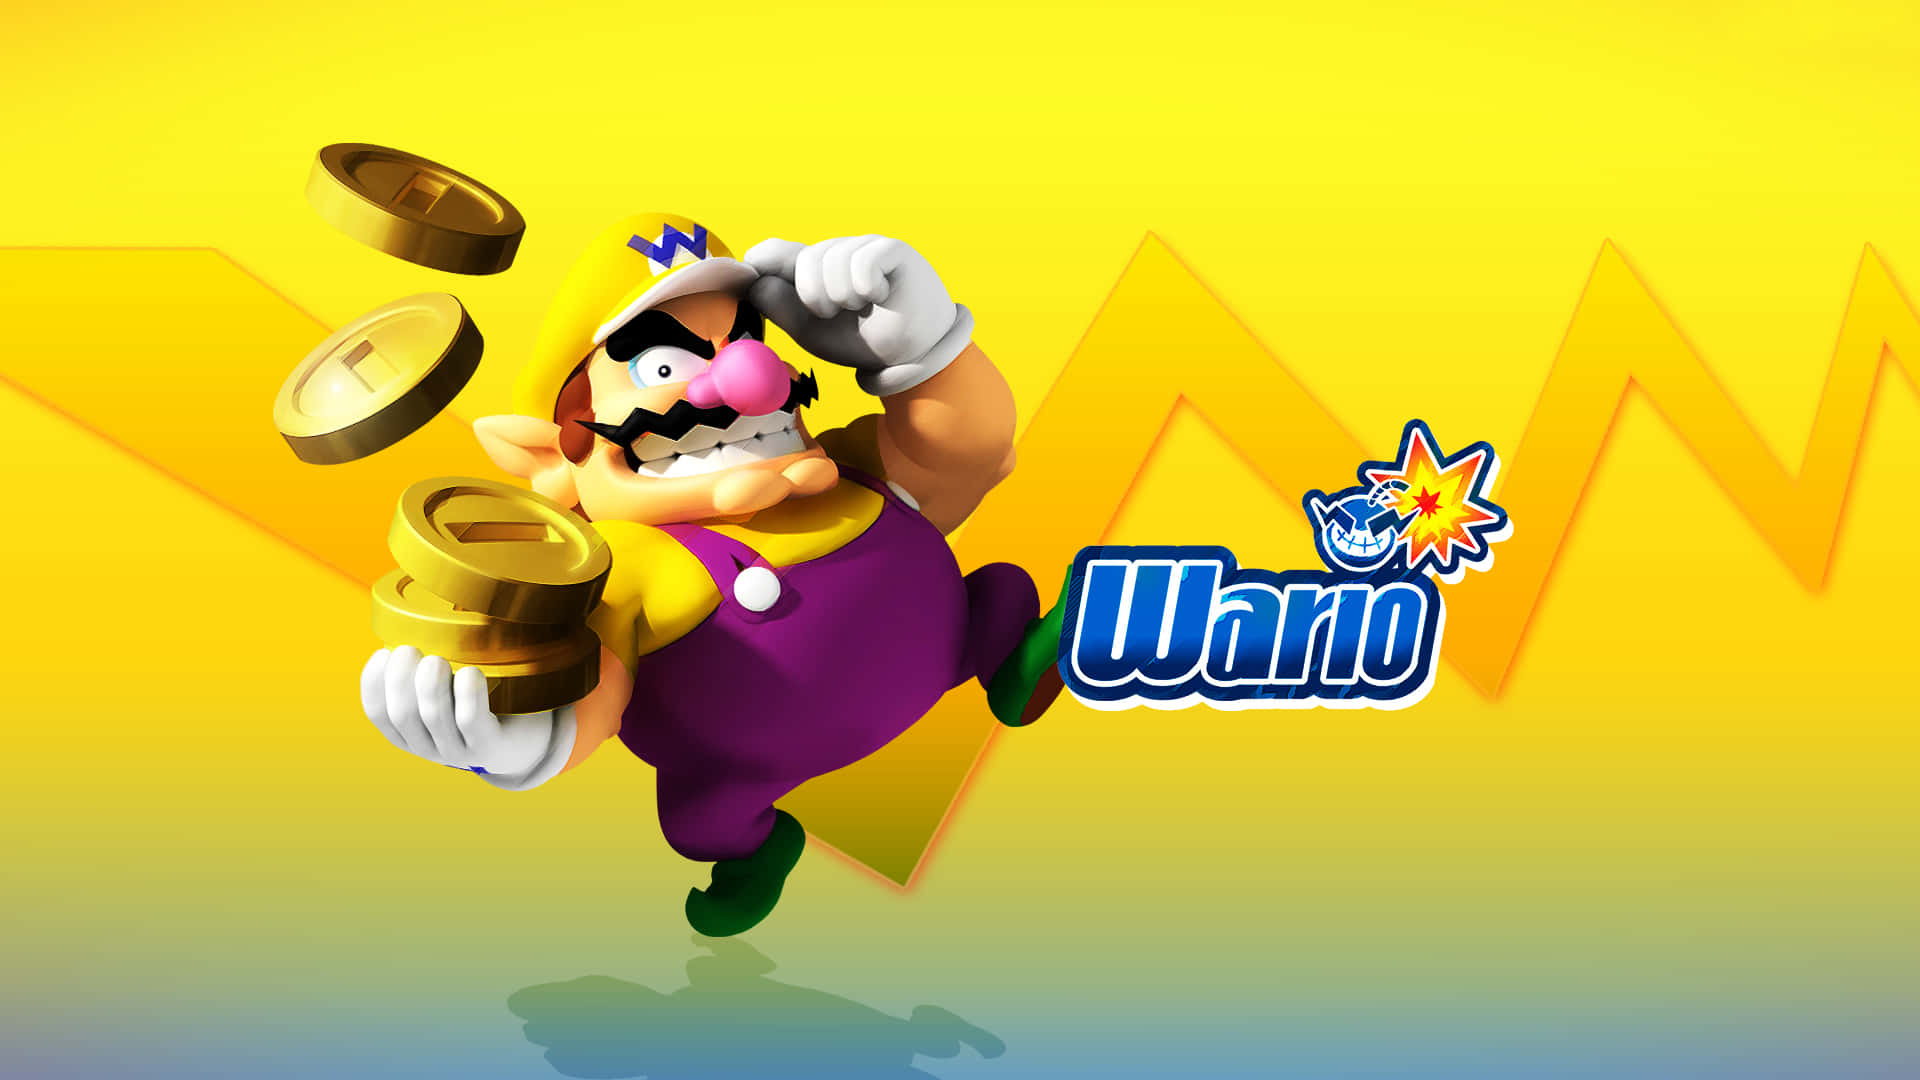 Wario Smirking In A Colorful, Action-packed Background Background